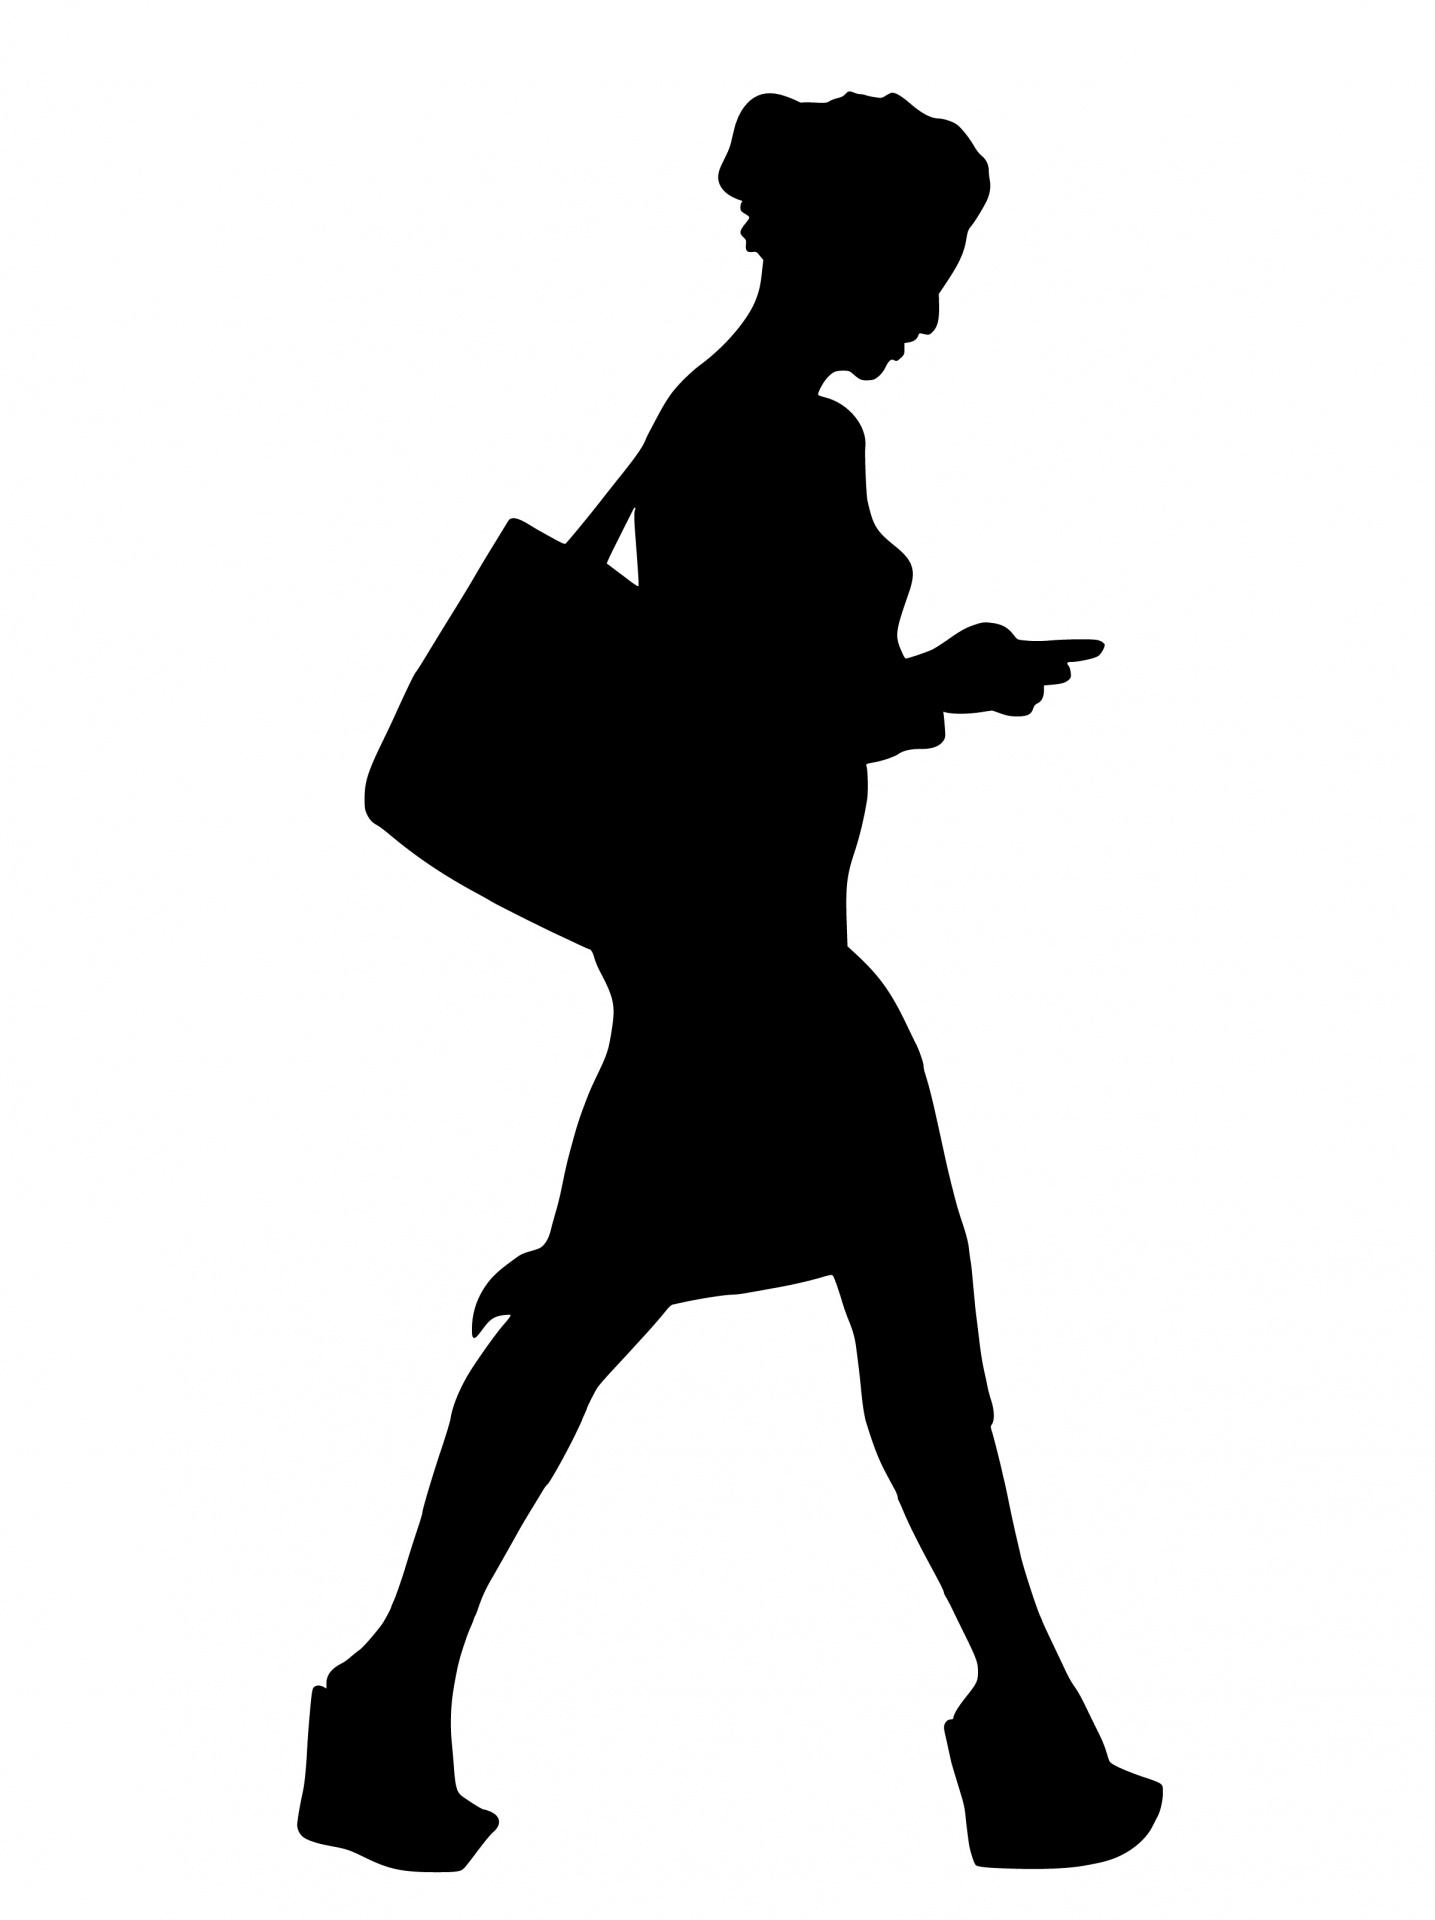 woman, Phone, walking,text,bag,mobile,Message, concentrate, sending, reading, using, confident, Lifestyle, going, Street, Silhouette